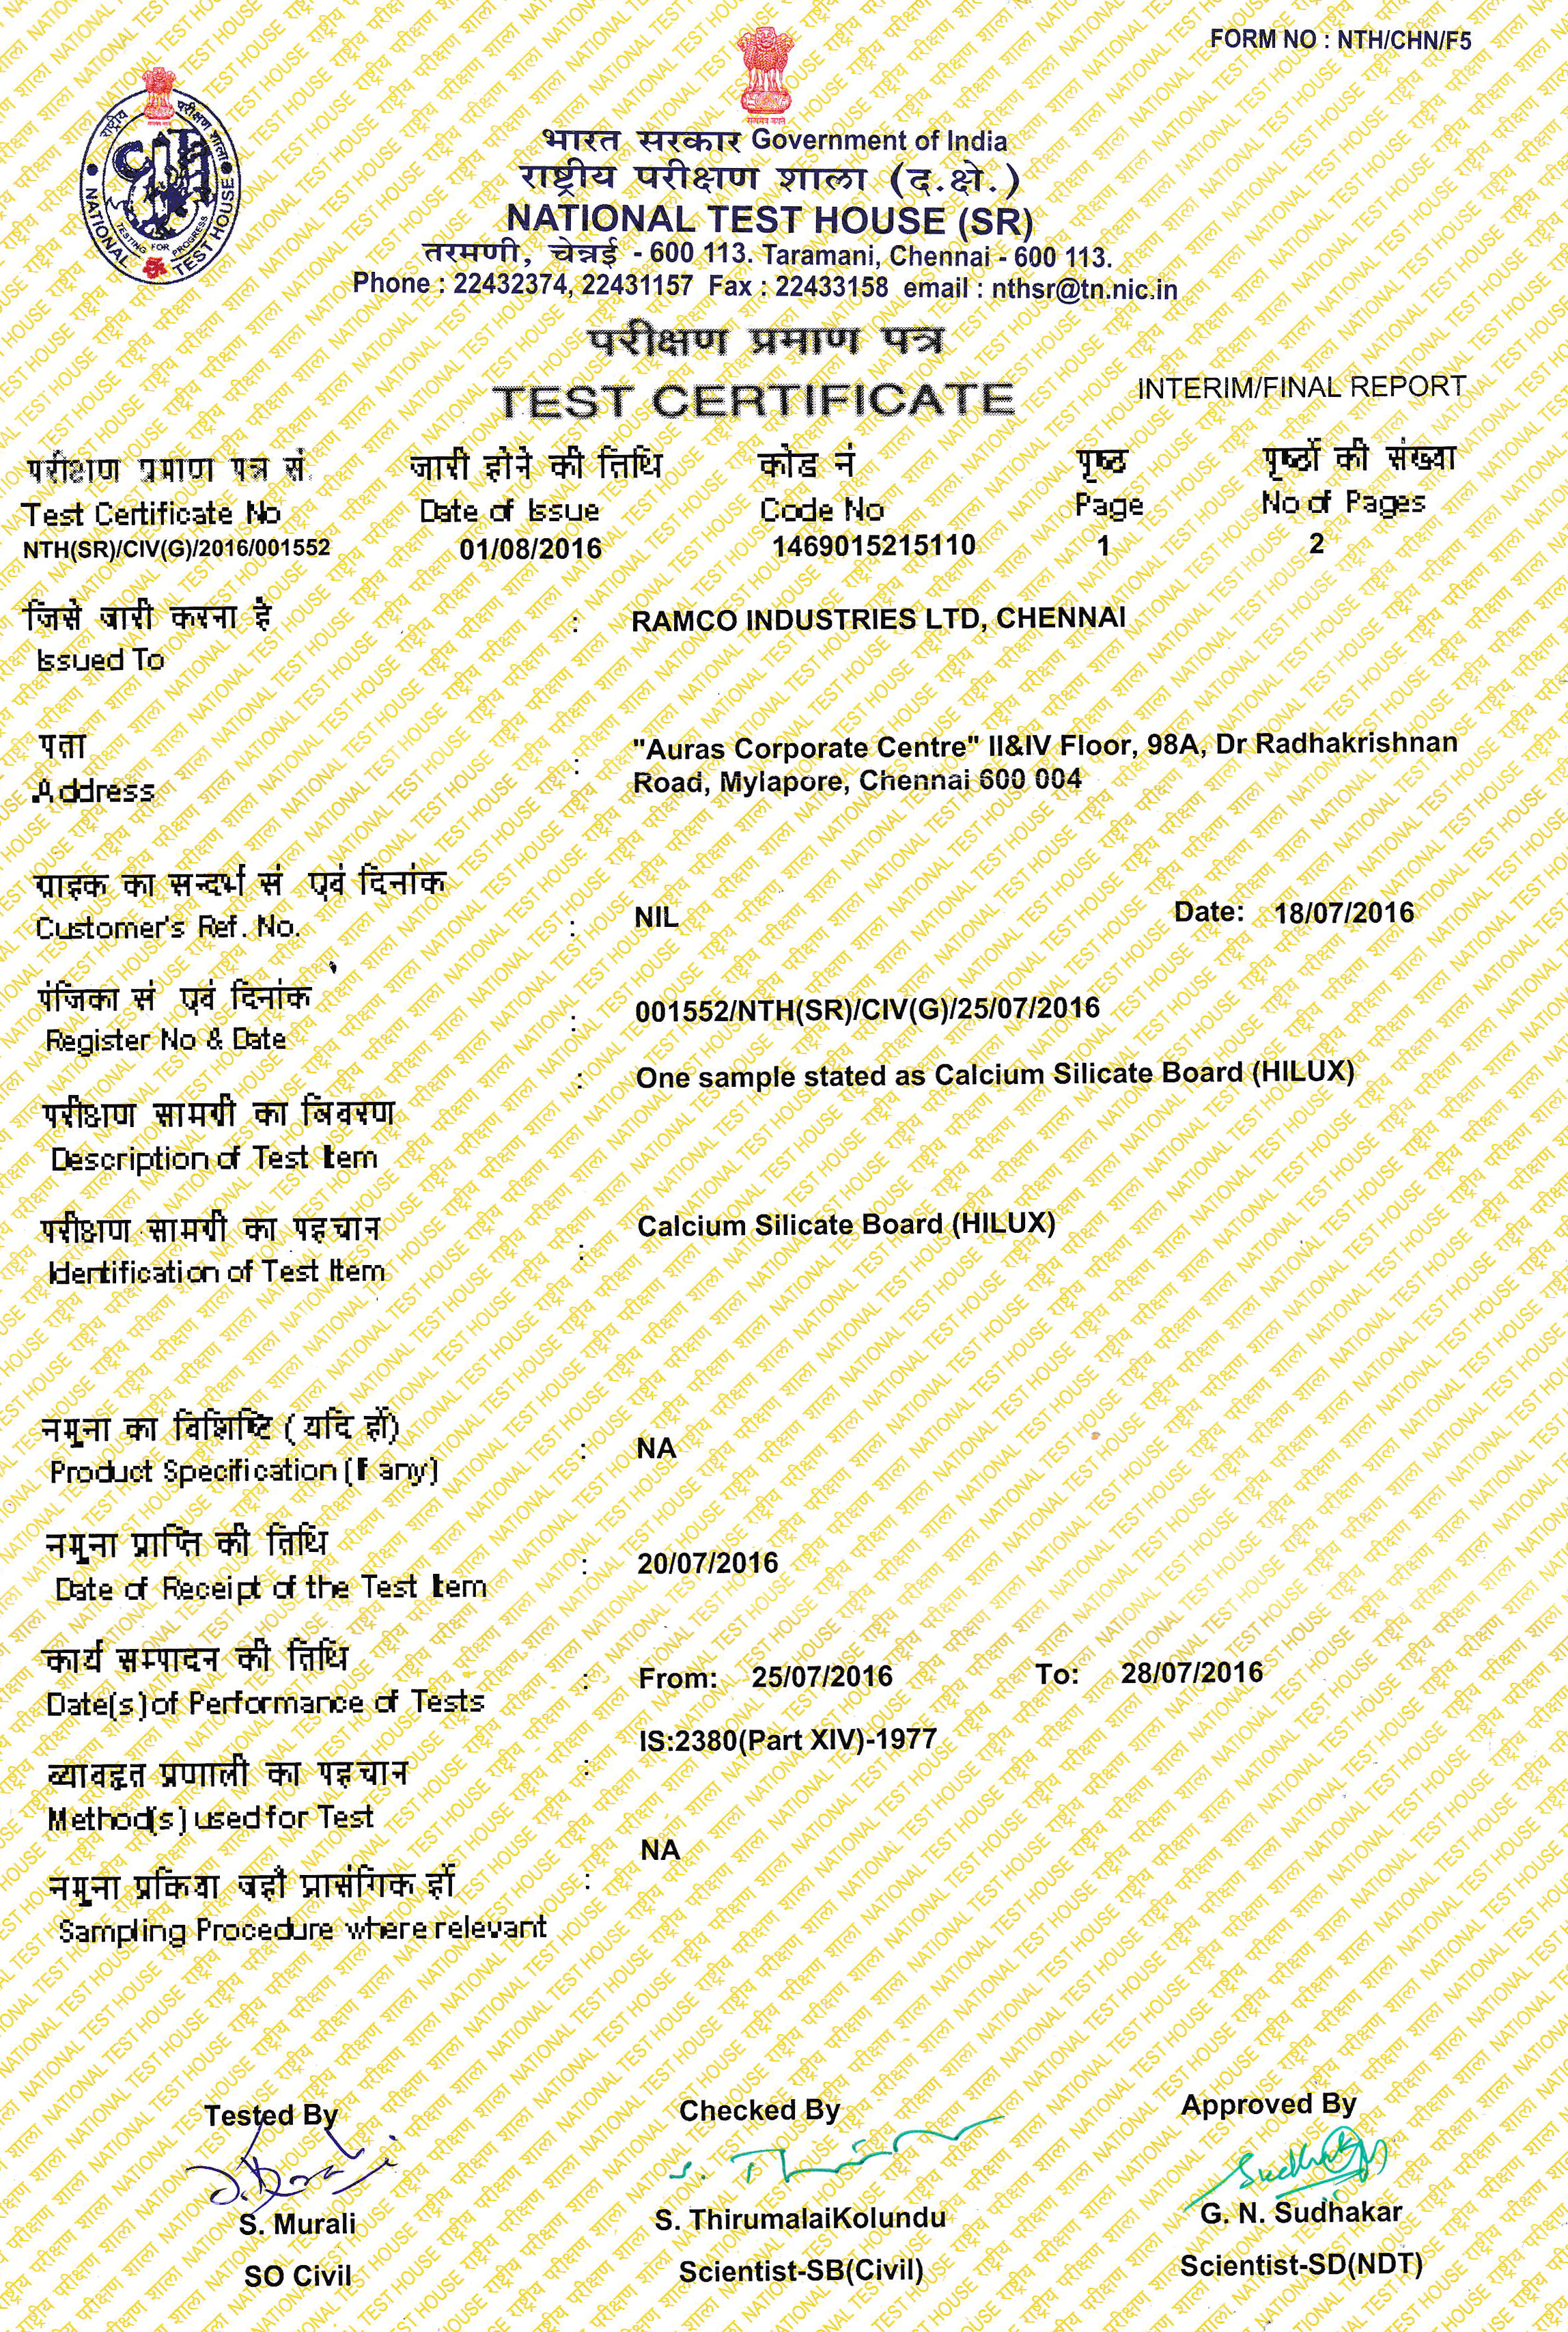 RAMCO-CERTIFICATE